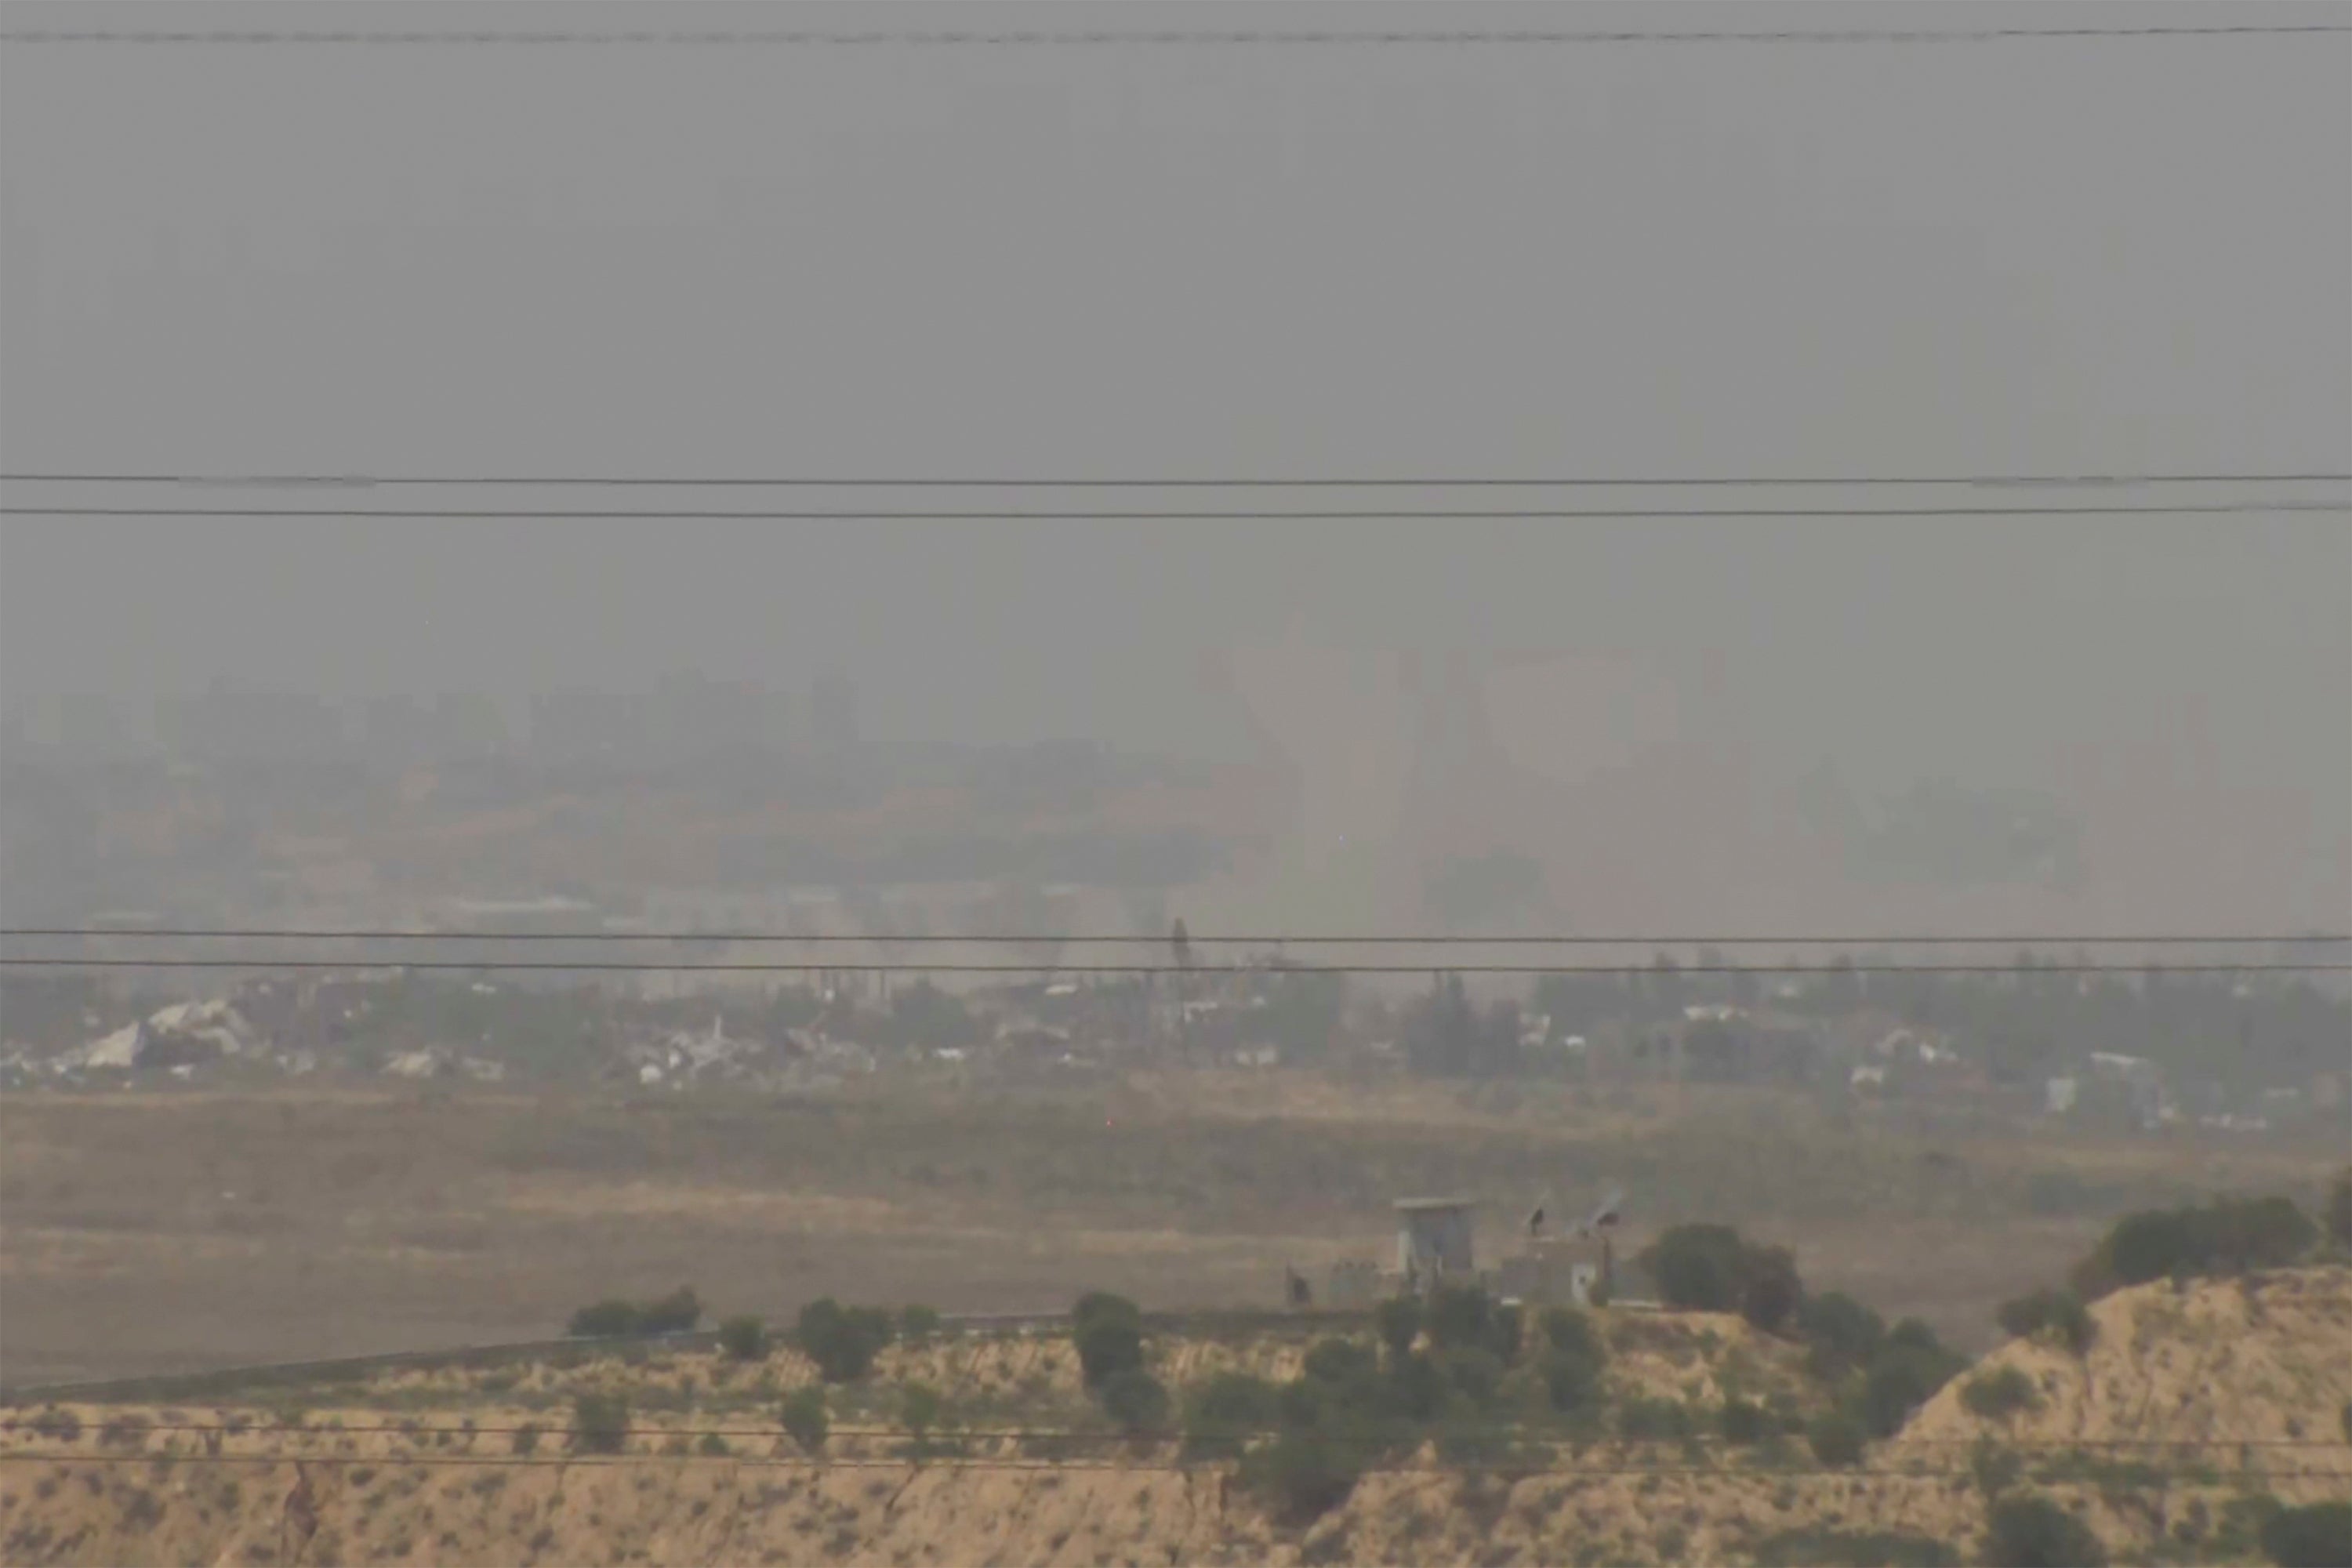 The view from the Israel AP live feed, which was taken down by Israeli officials